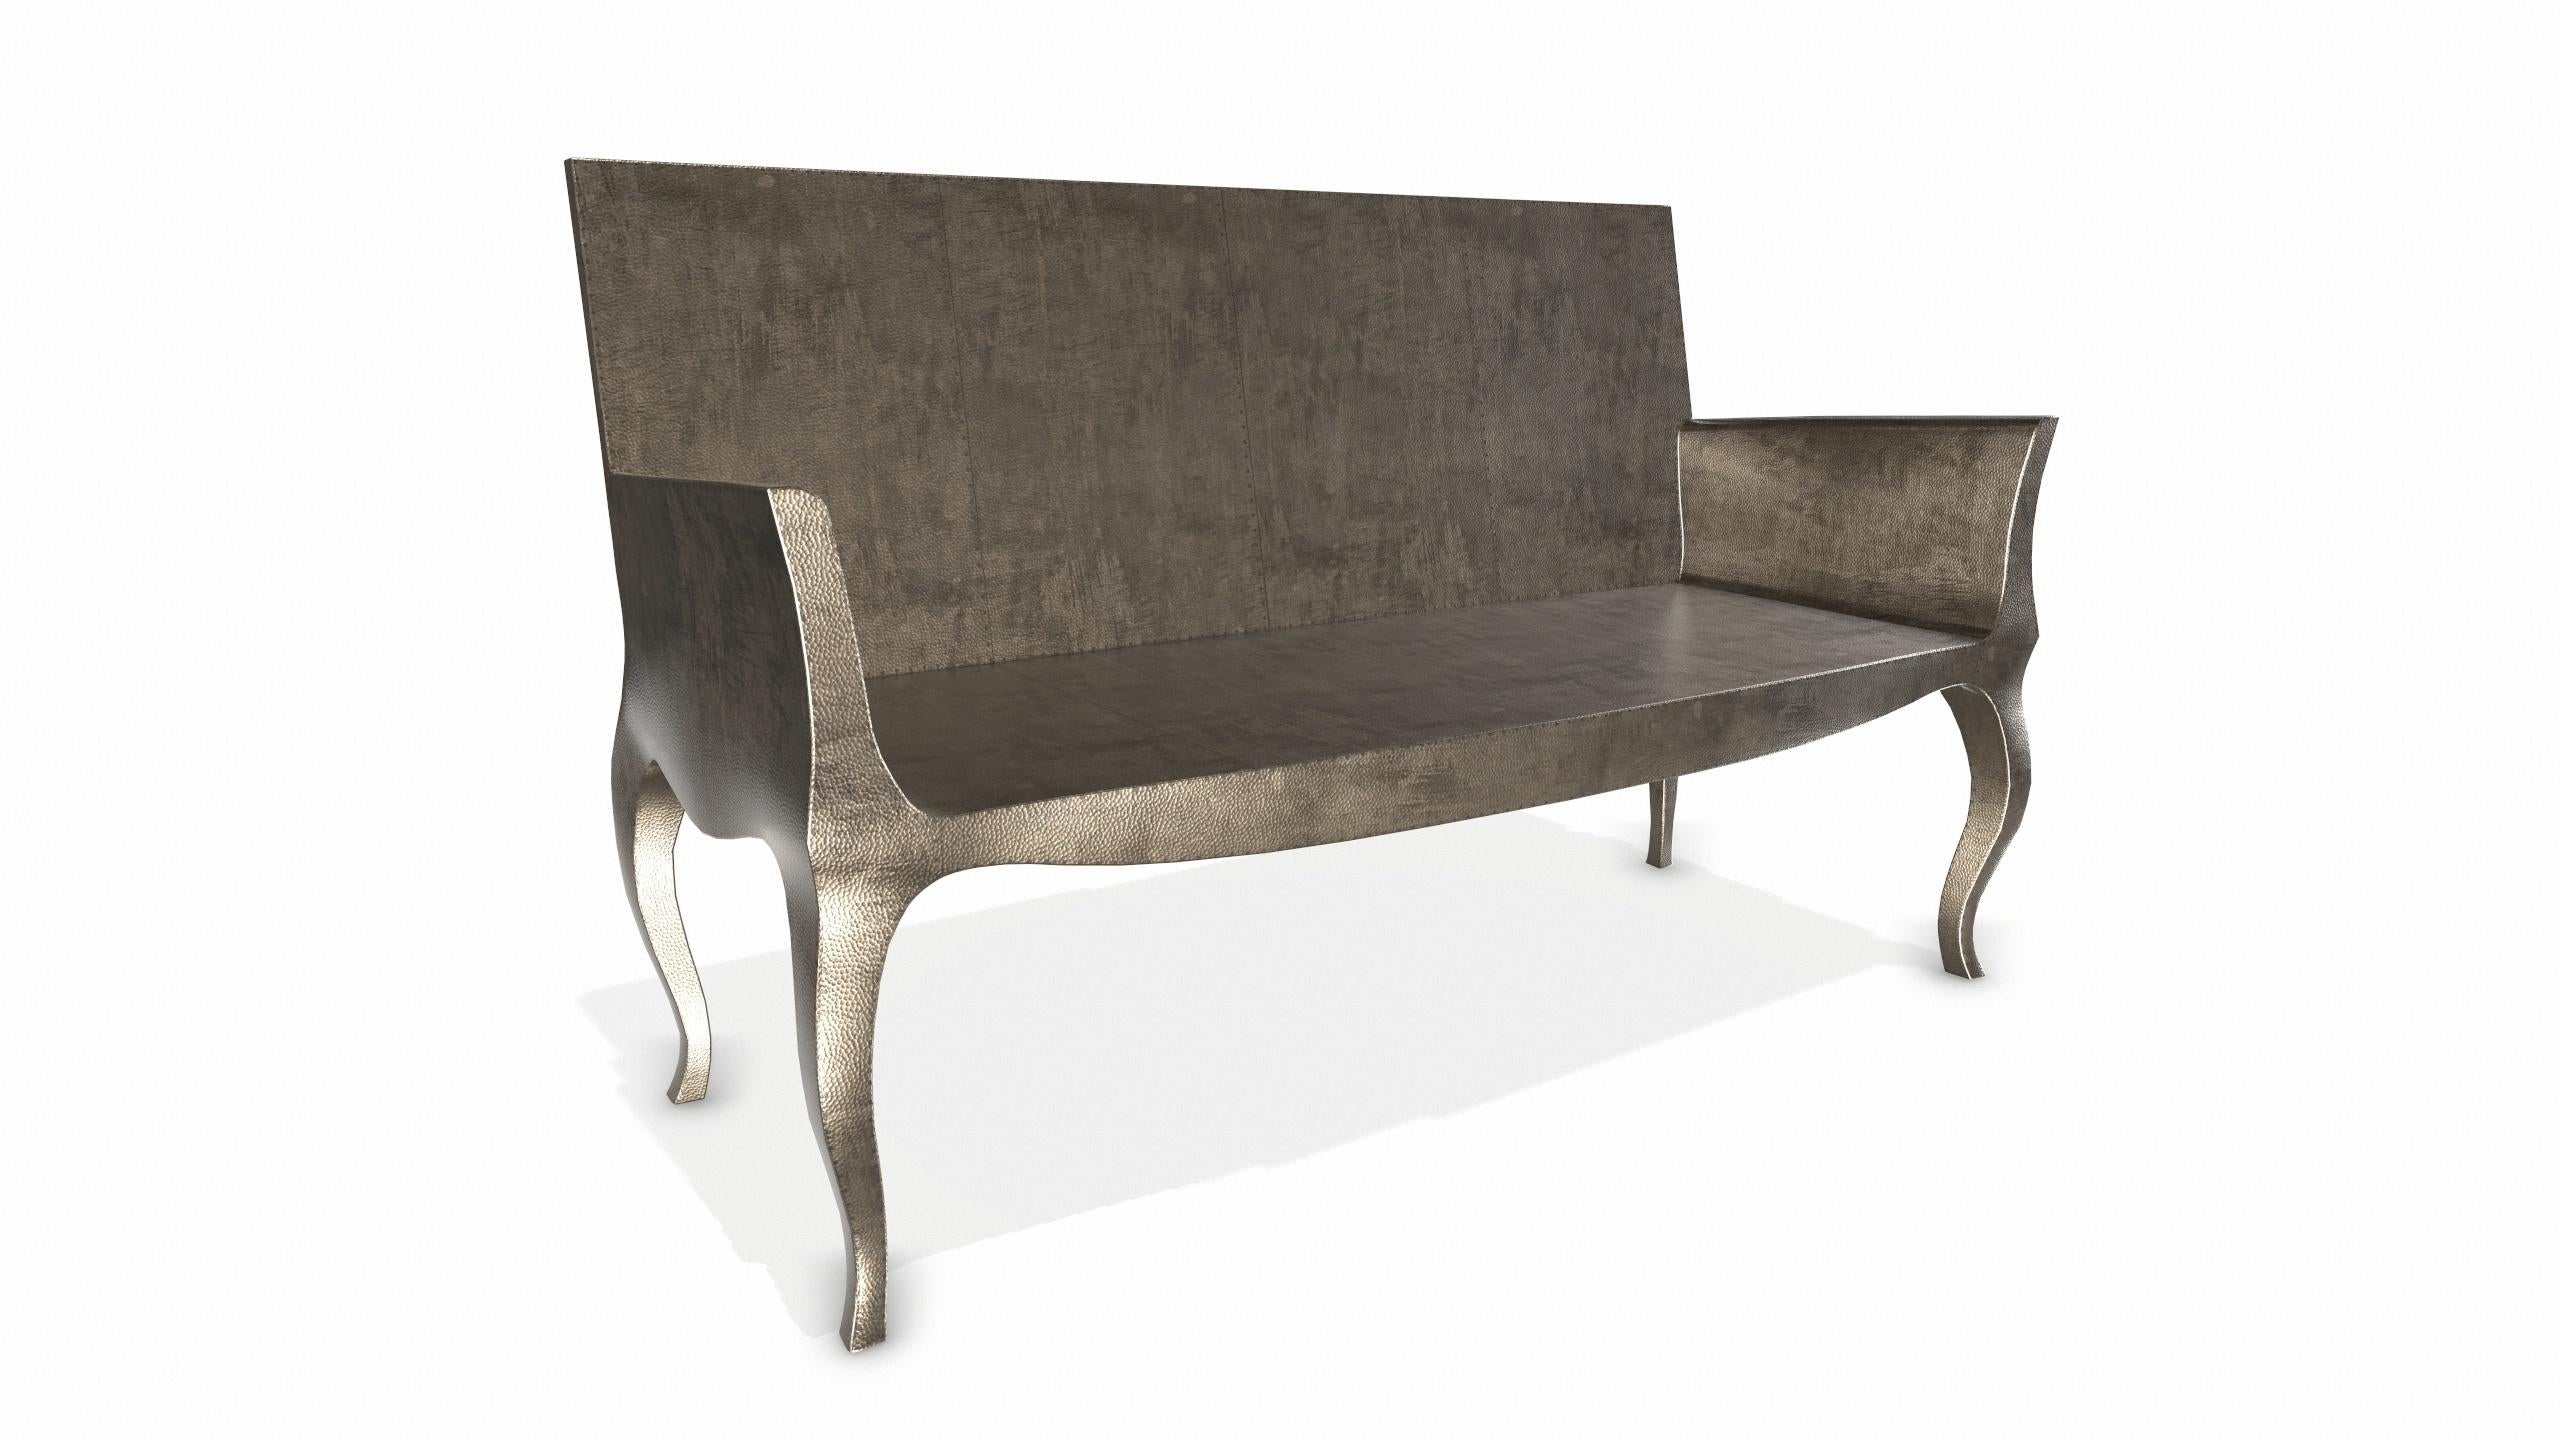 Contemporary Louise Settee Art Deco Daybeds in Mid. Hammered Antique Bronze by Paul Mathieu  For Sale